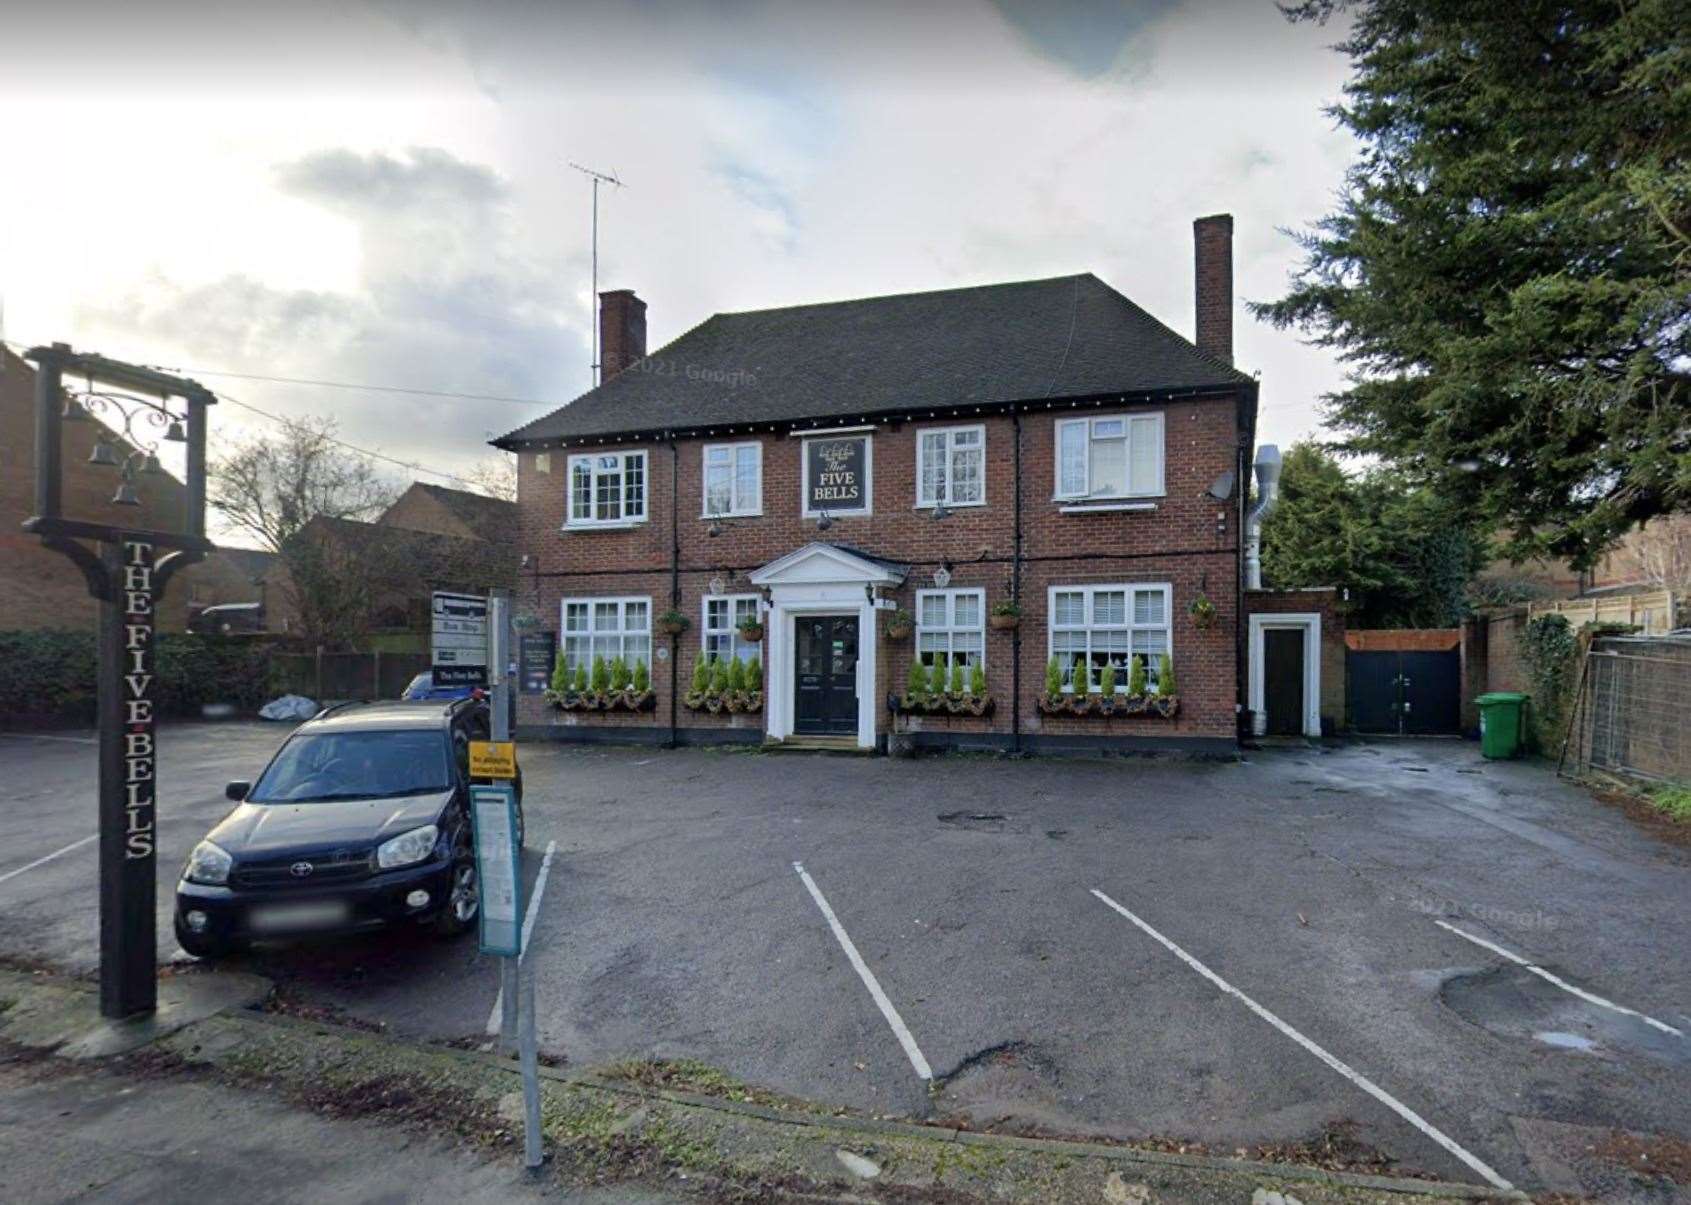 A fallen power cable and tree outside The Five Bells pub in Halling caused staff to be trapped. Picture: Google